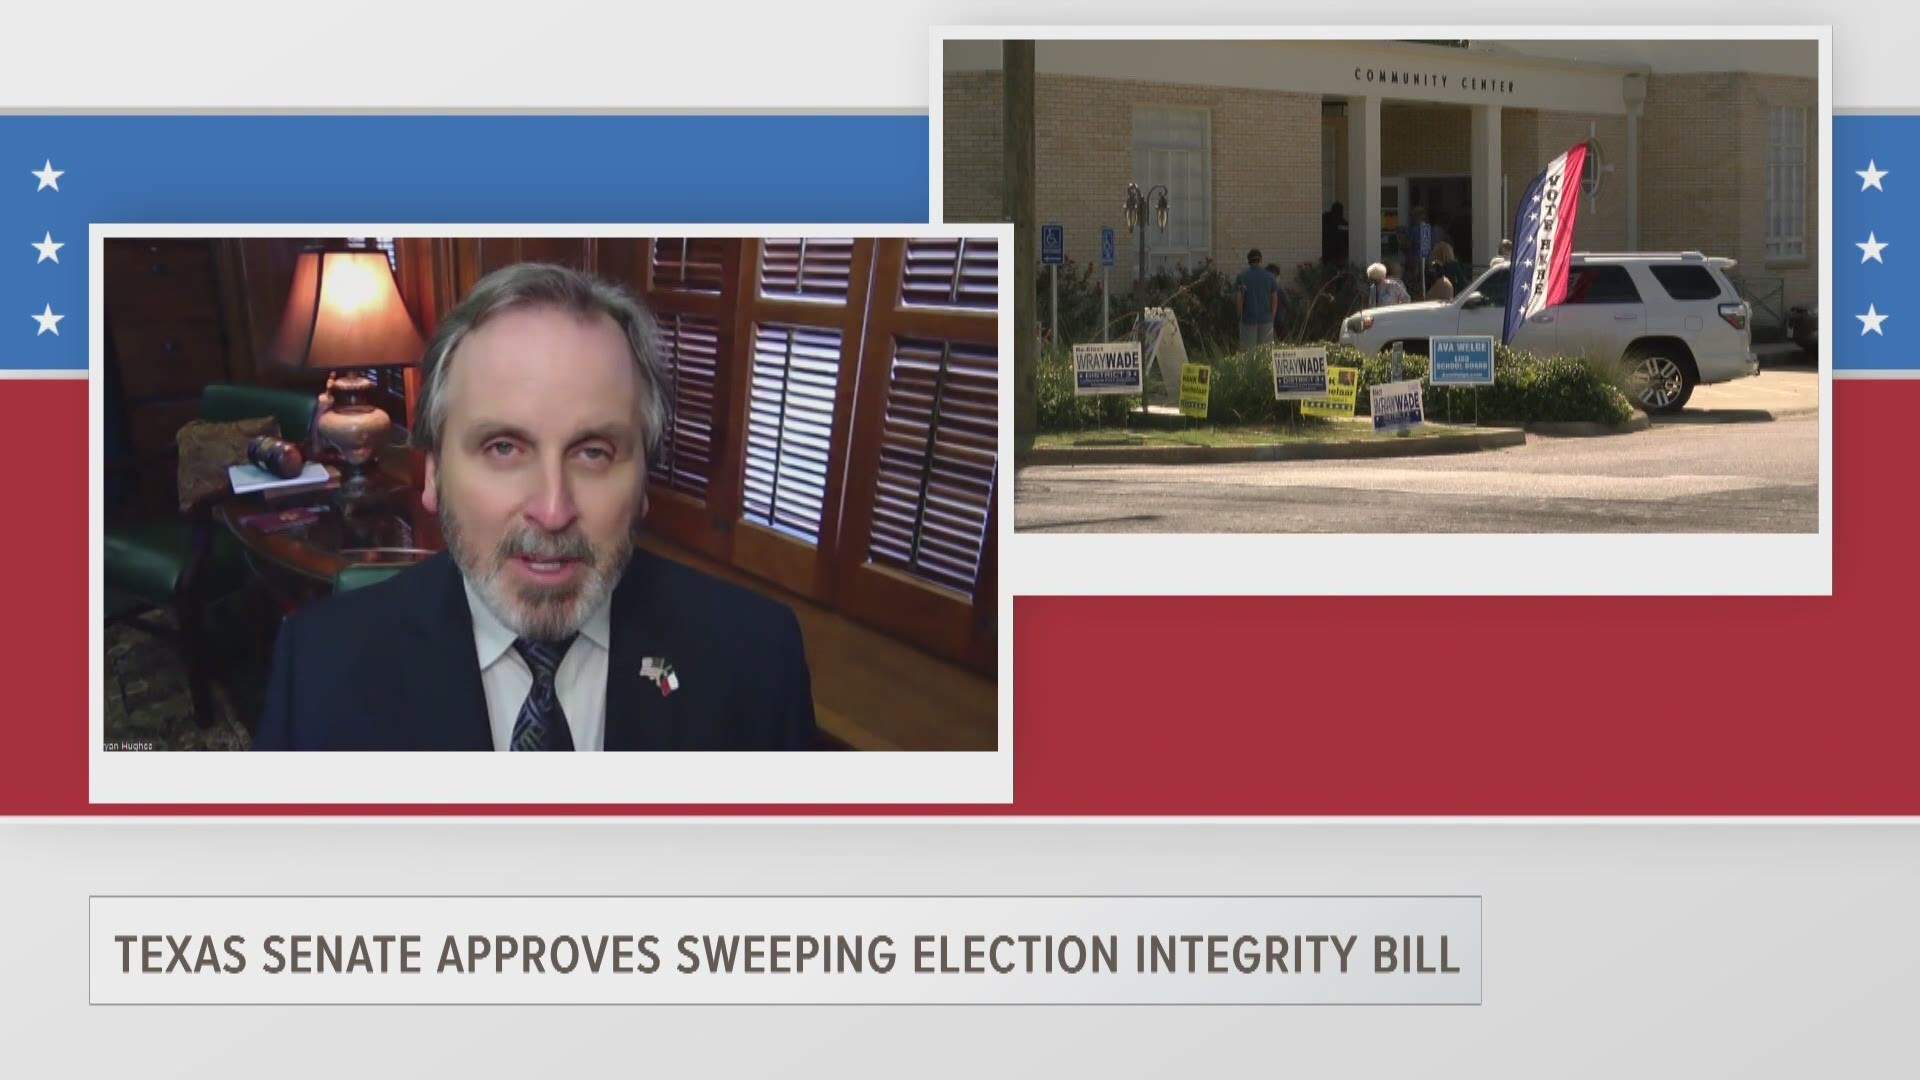 Hughes (R-Mineola) talks about the need for and potential impact of SB7, an election reform bill critics claim would impede minorities' ability to vote